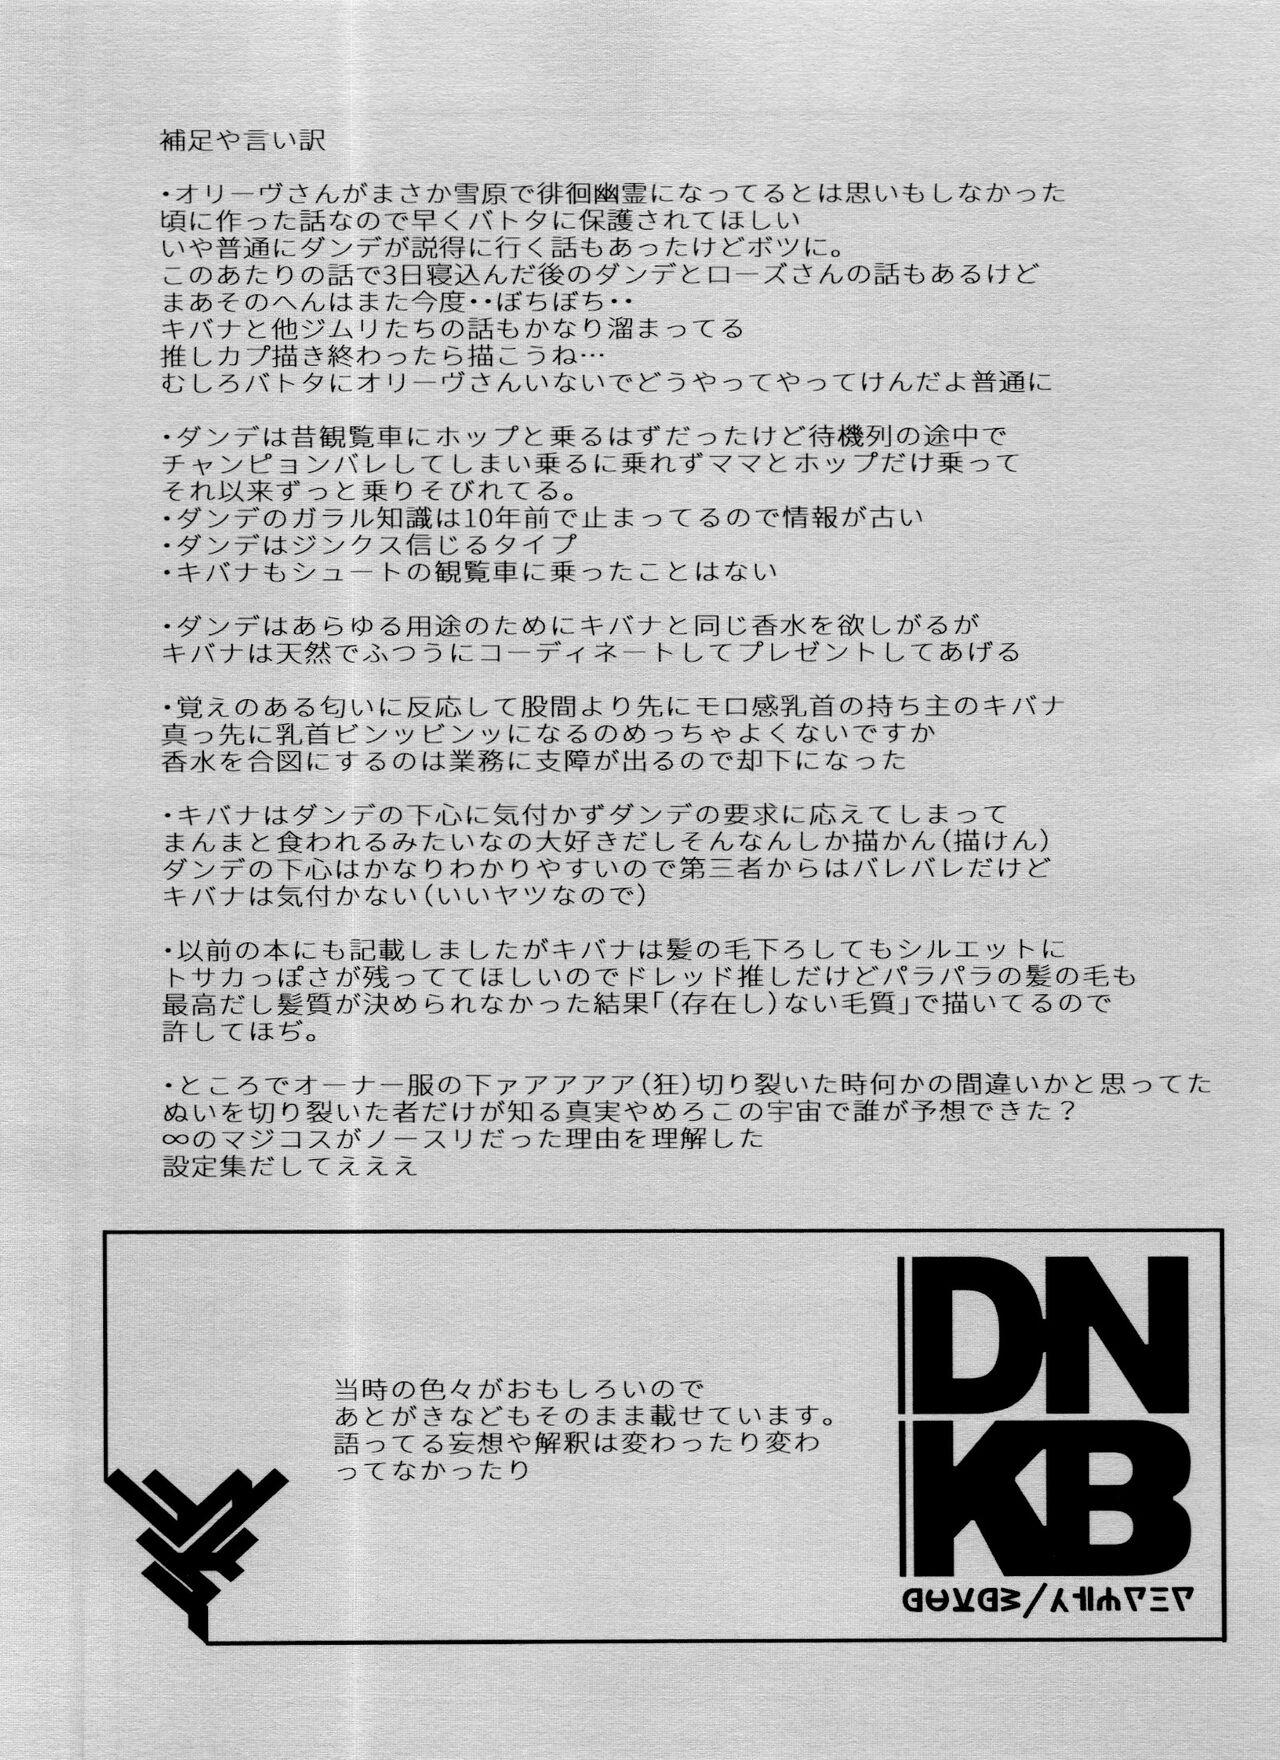 DNKB COMPLETE BOOK 51